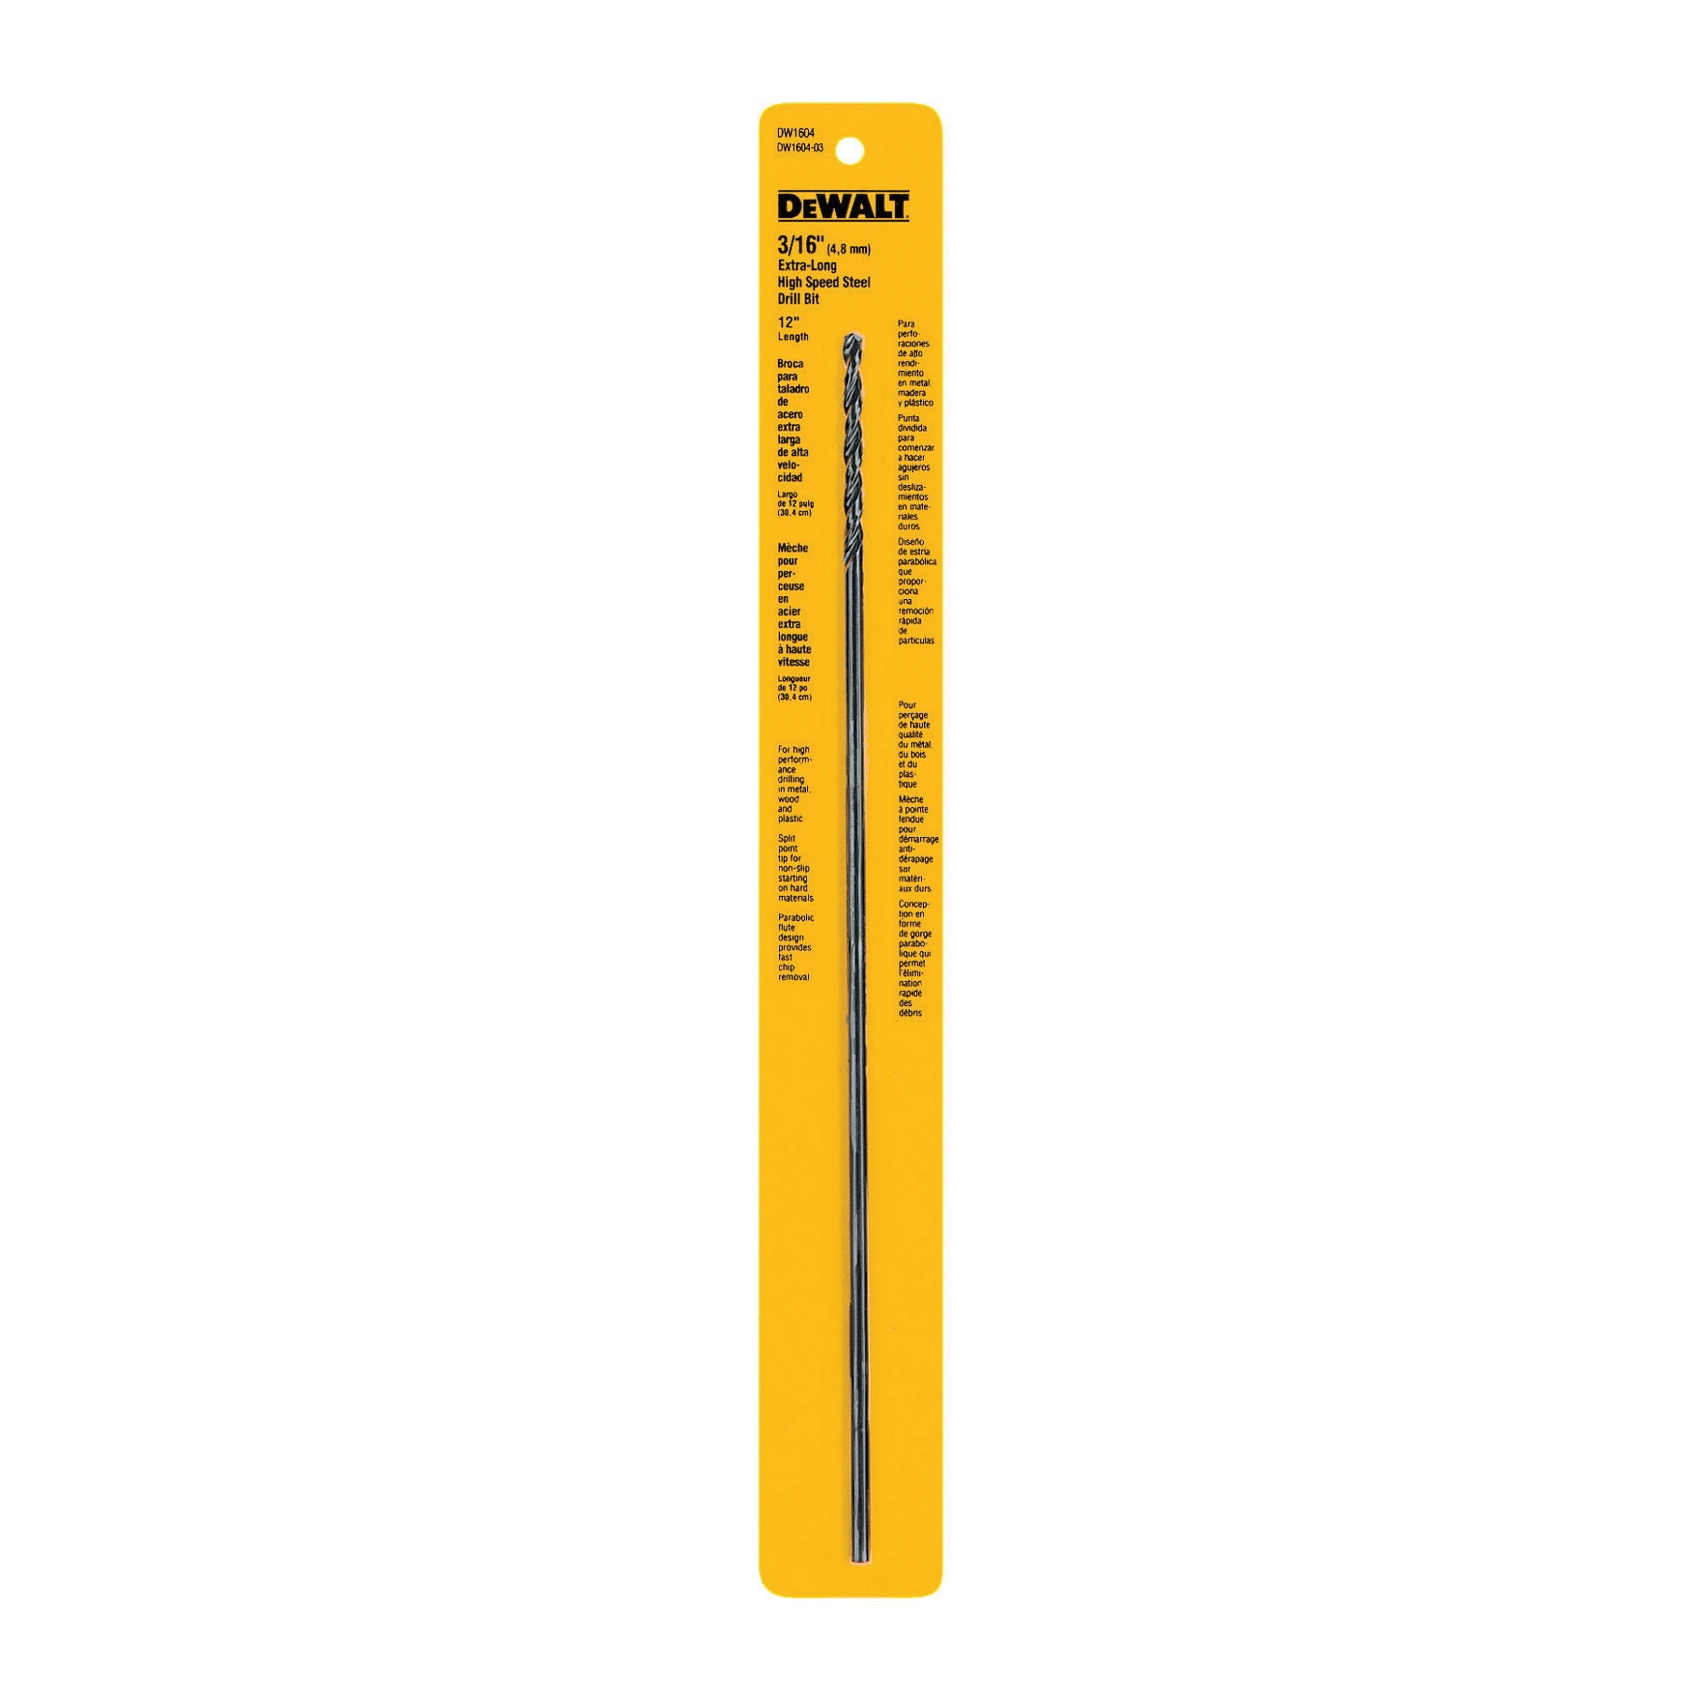 DeWALT® Guaranteed Tough® DW1612 Extension Length Drill, 7/16 in Drill - Fraction, 0.4375 in Drill - Decimal Inch, 12 in OAL, HSS